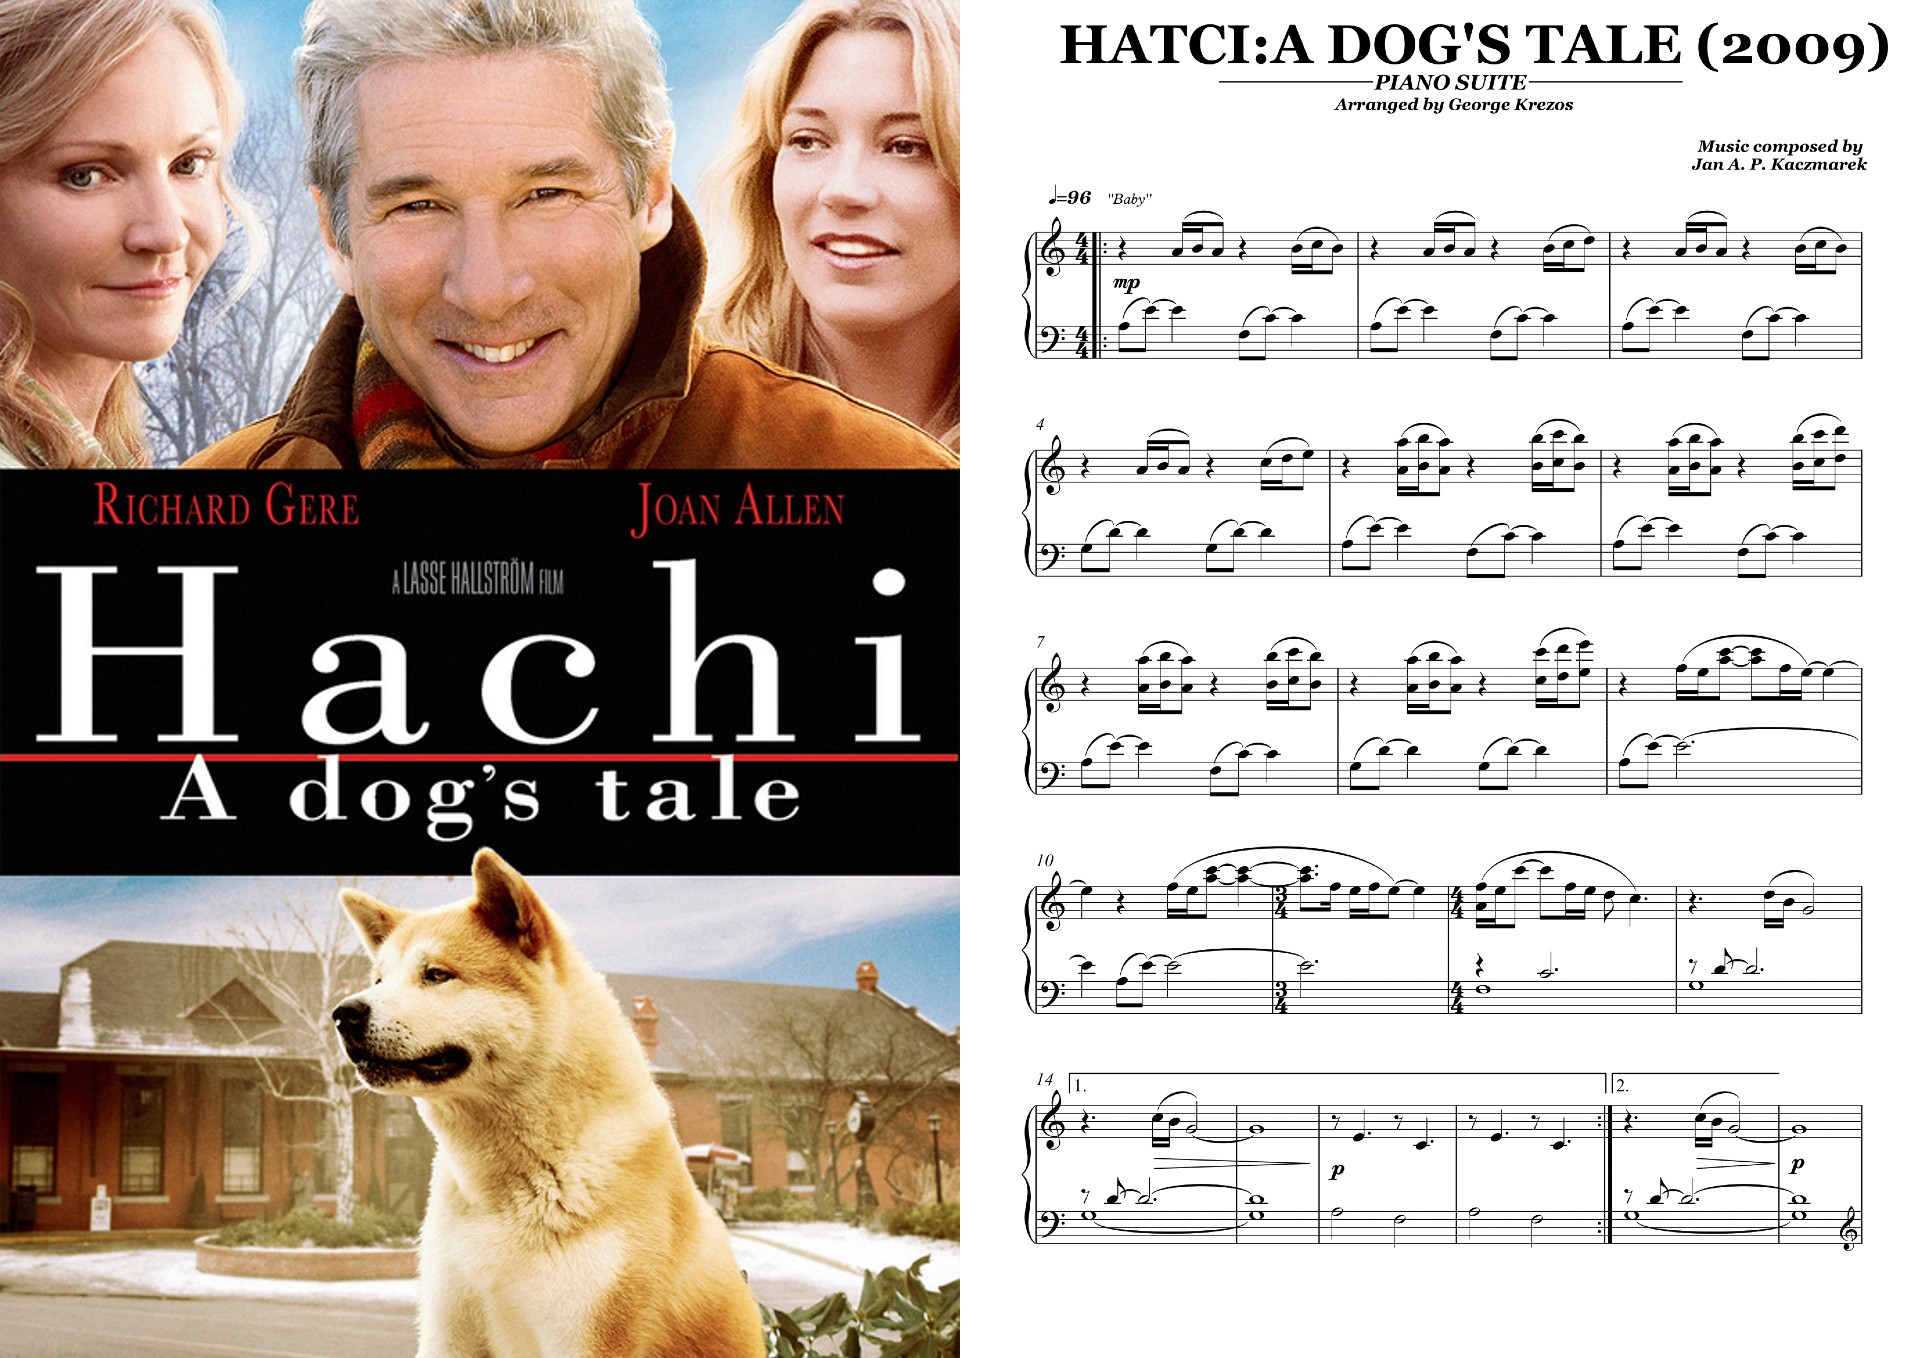 HATCHI A DOG'S TALE - Piano Suite.jpg